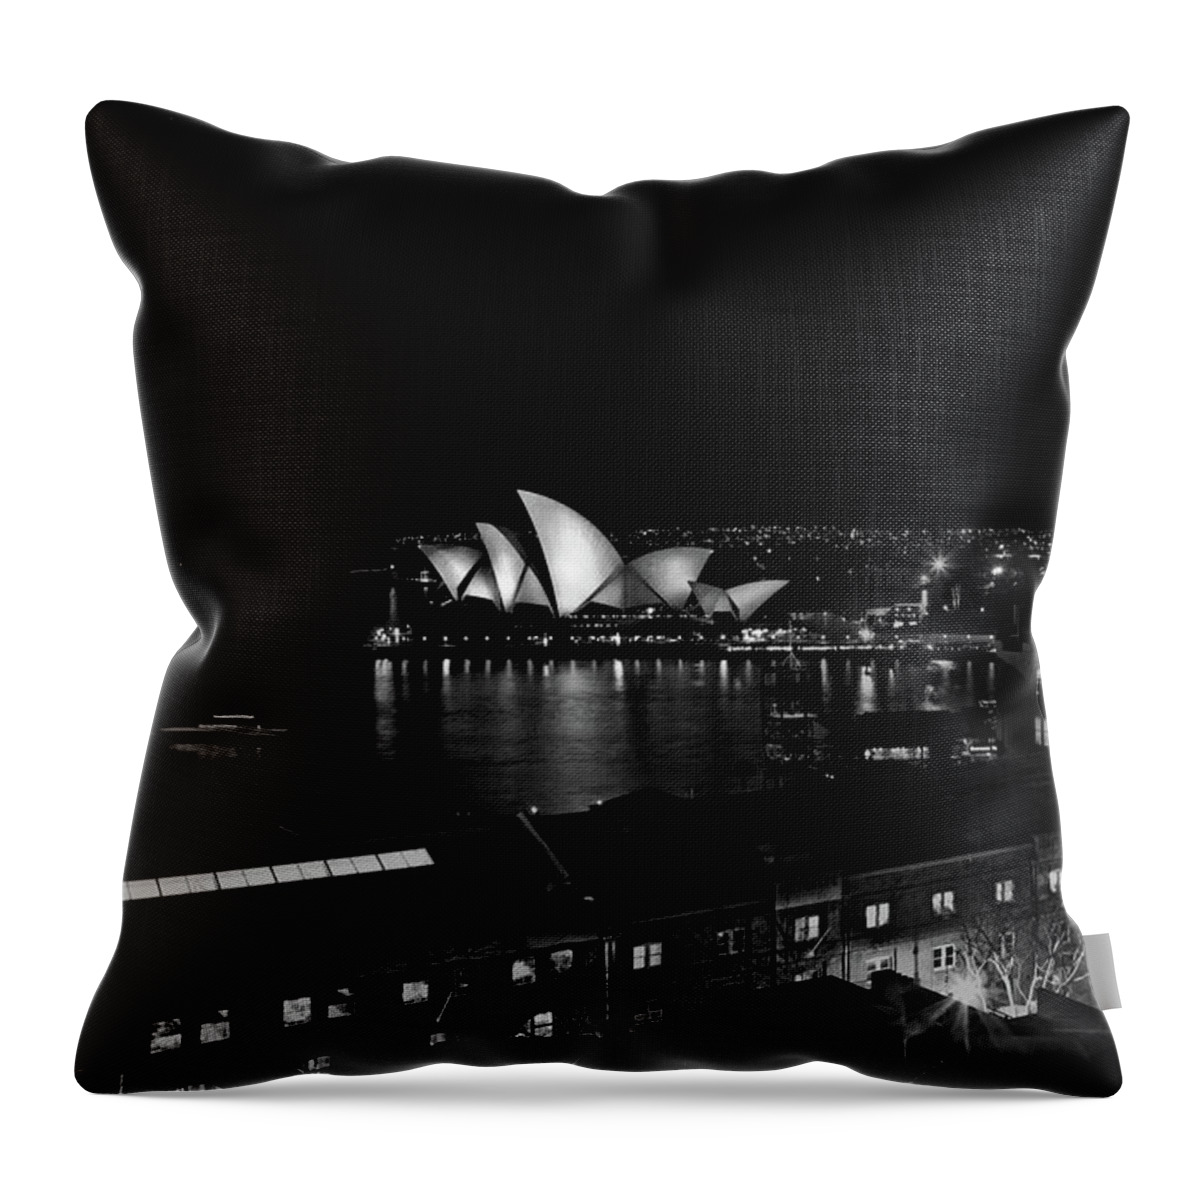 Sparkling Throw Pillow featuring the photograph Sails In The Night by Az Jackson